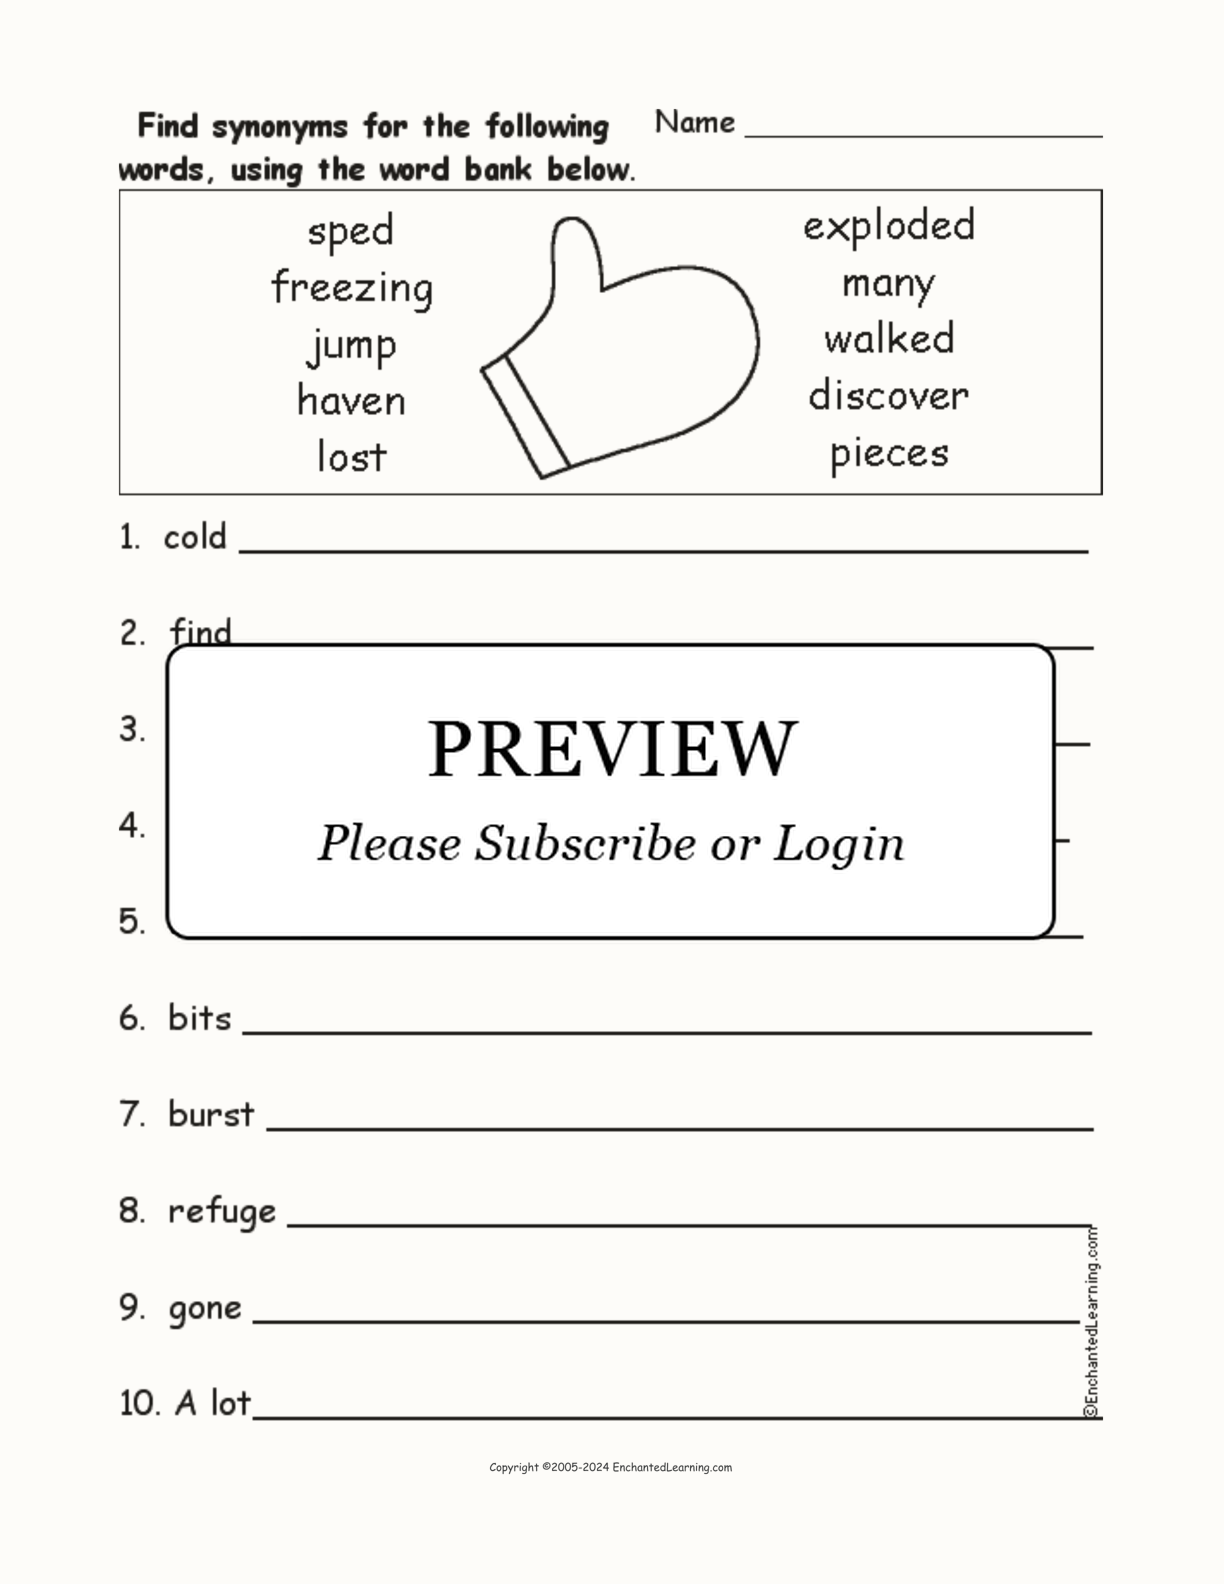 'The Mitten' Synonyms interactive worksheet page 1